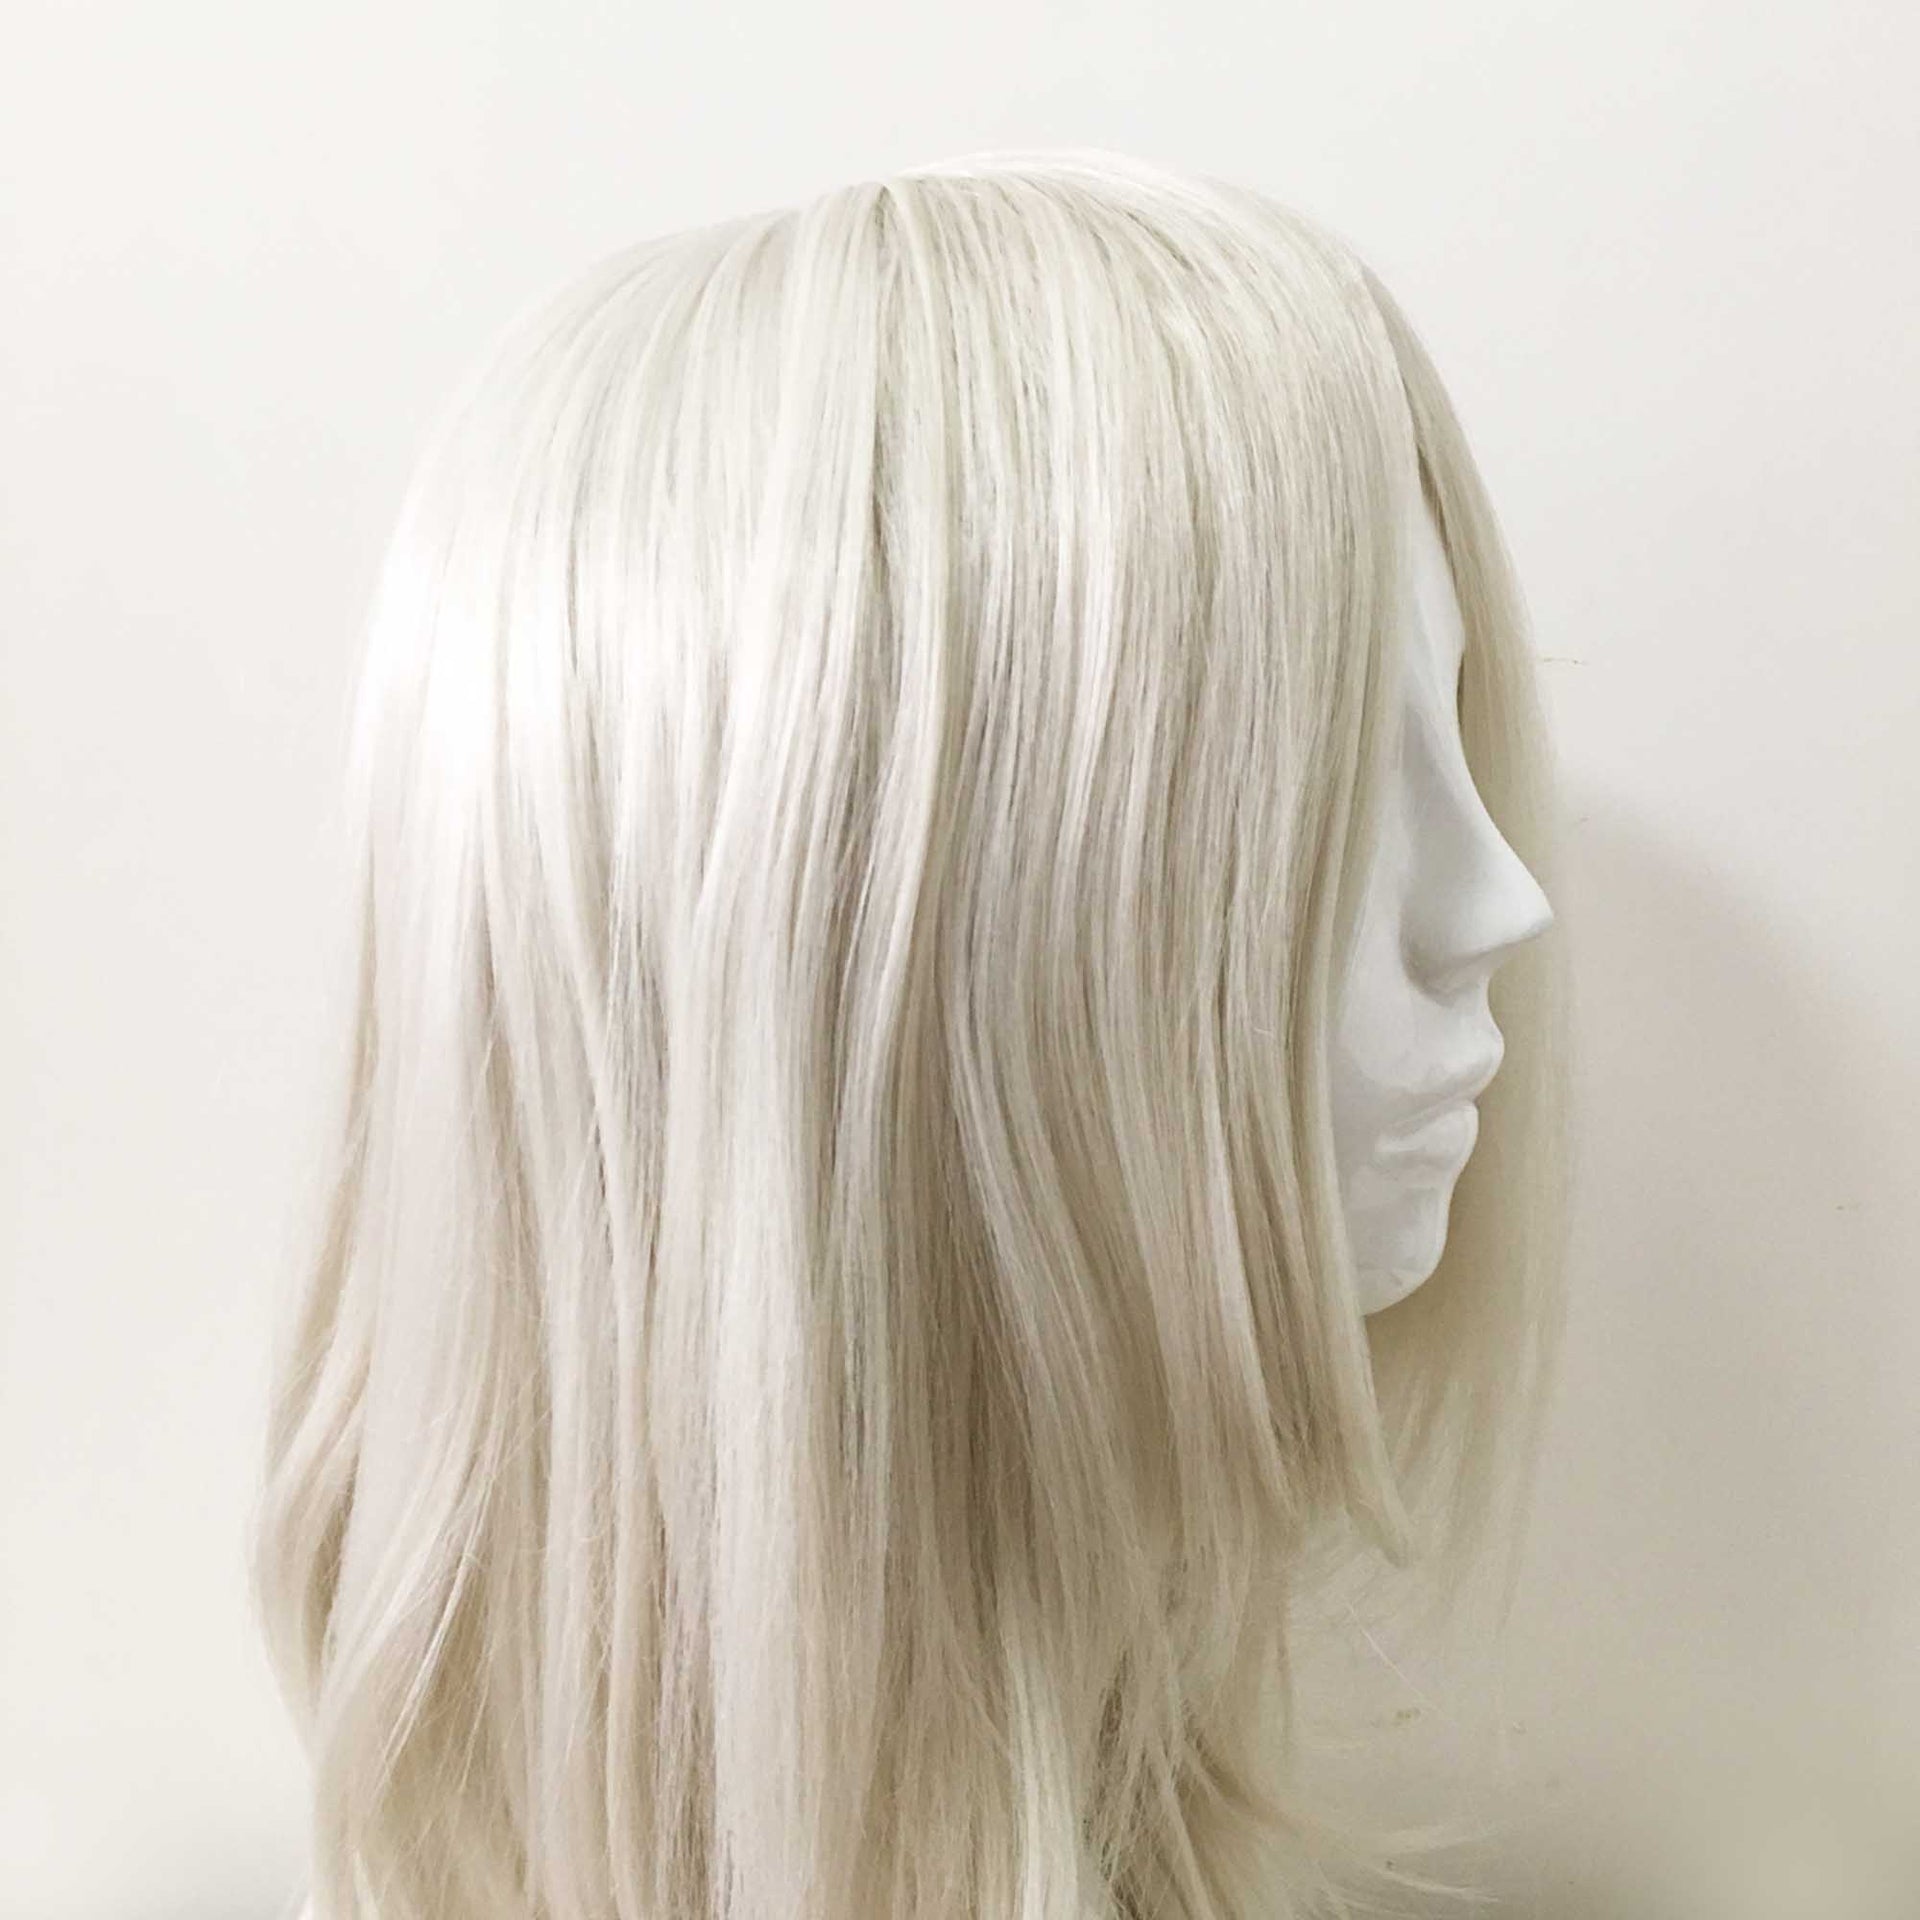 nevermindyrhead Men White Long Straight Long Bangs Middle Part Cosplay Wig